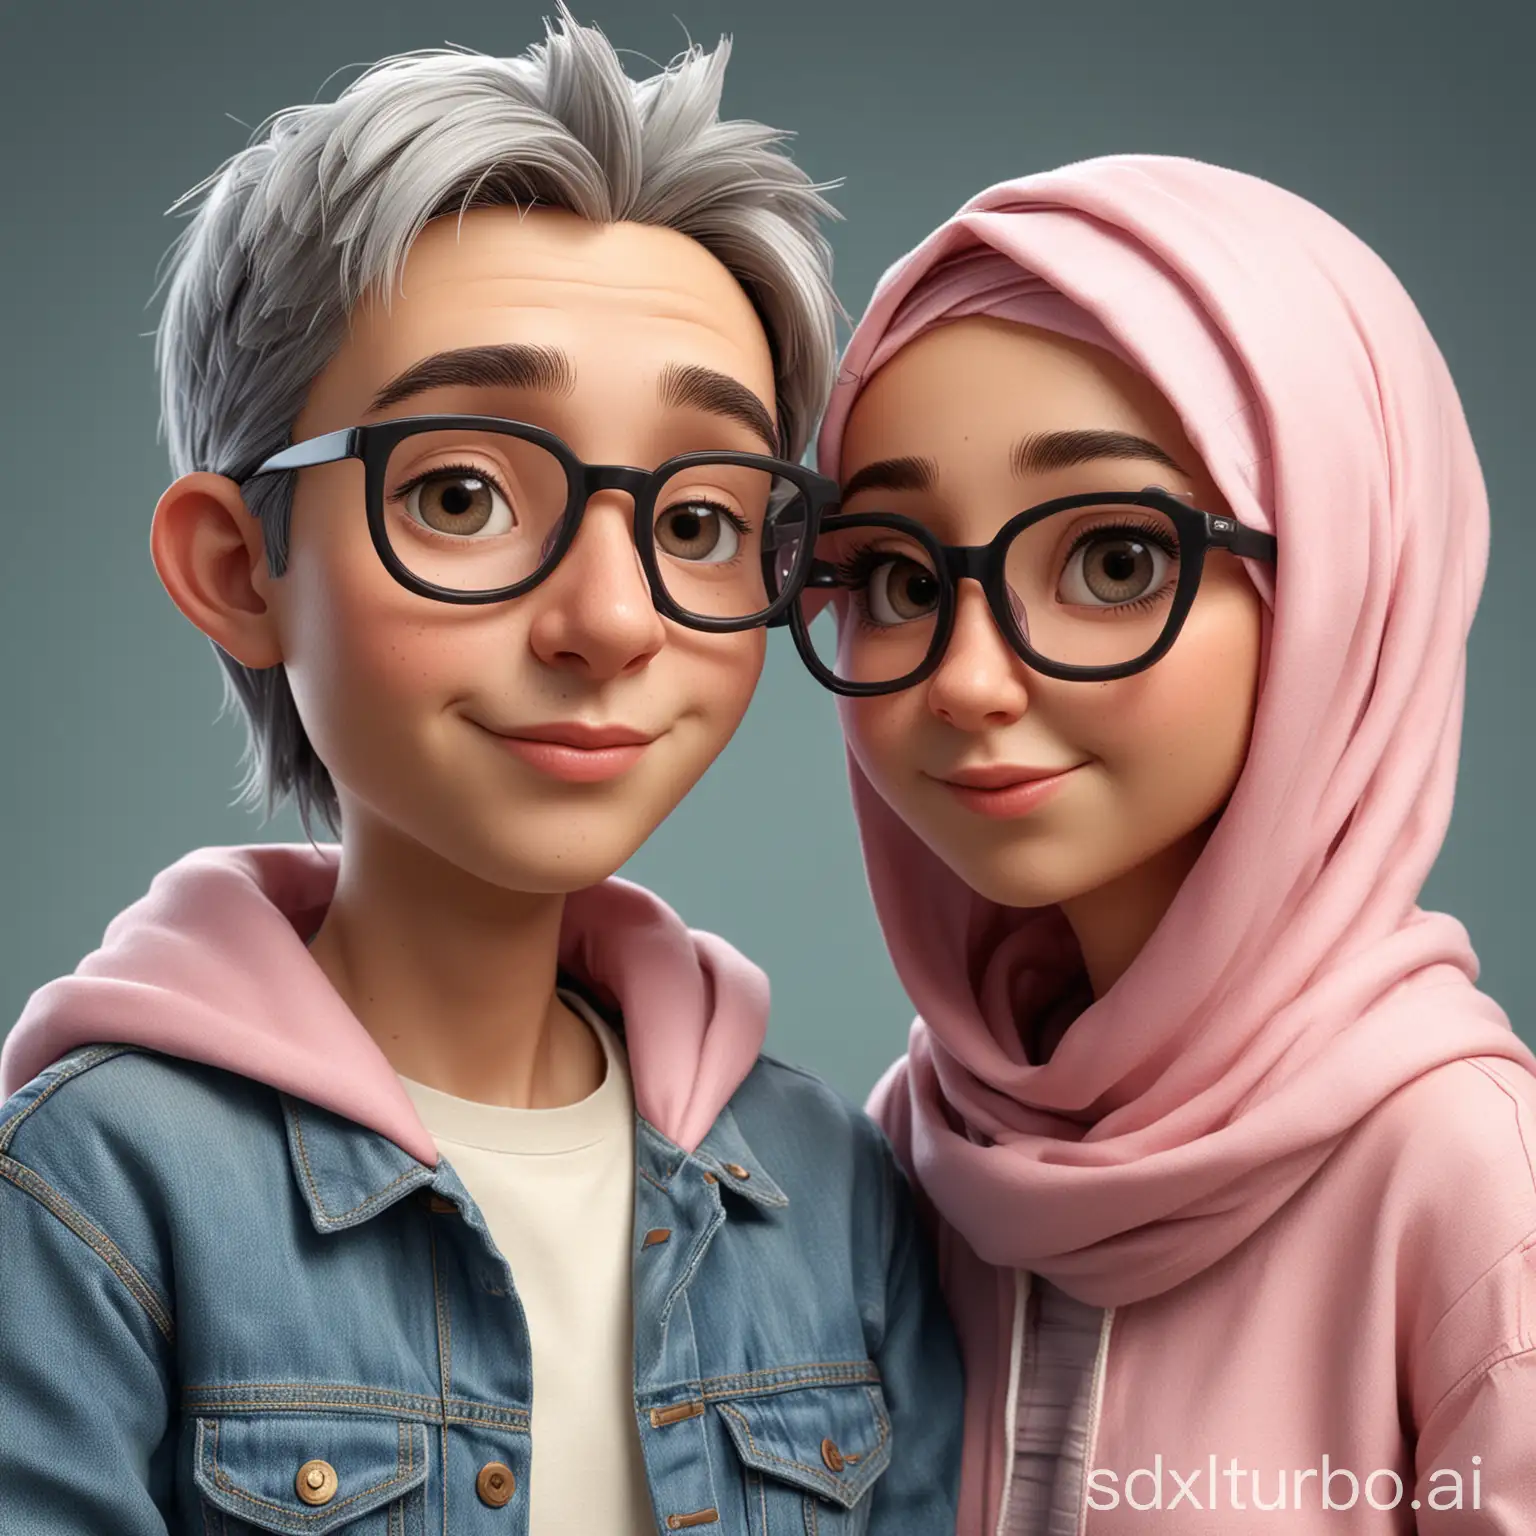 a Caricature 3D realistic cartoon style half body with a big head. The 20 year old man wore a denim jacket with a visible collar and had gray hair. Beside him, a beautiful 20 year old woman wearing glasses was sitting close to each other. The woman was only partially visible, wearing a cream sweater and a pink hijab. They both look seriously focused facing the camera. The background is a beautiful garden with bright sunlight.